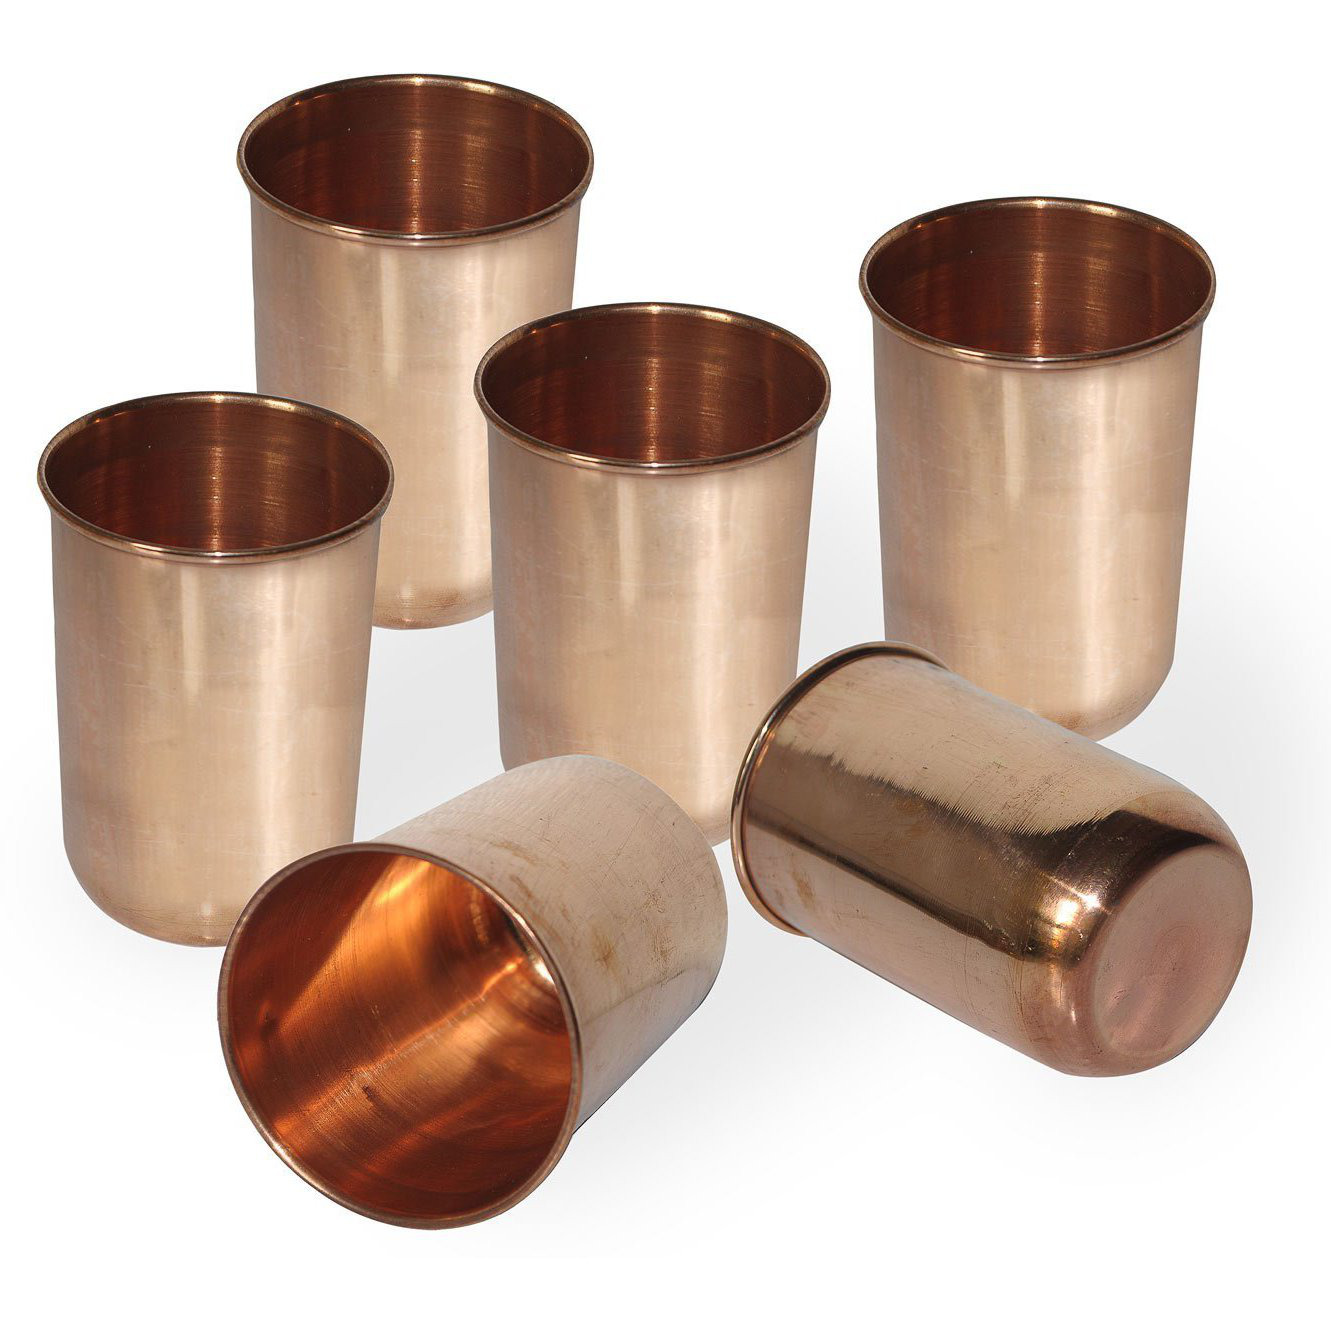 Set of 6 - Prisha India Craft B. Pure Copper Glass Cup for Water - Handmade Water Glasses - Traveller's Copper Mug for Ayurveda Benefits